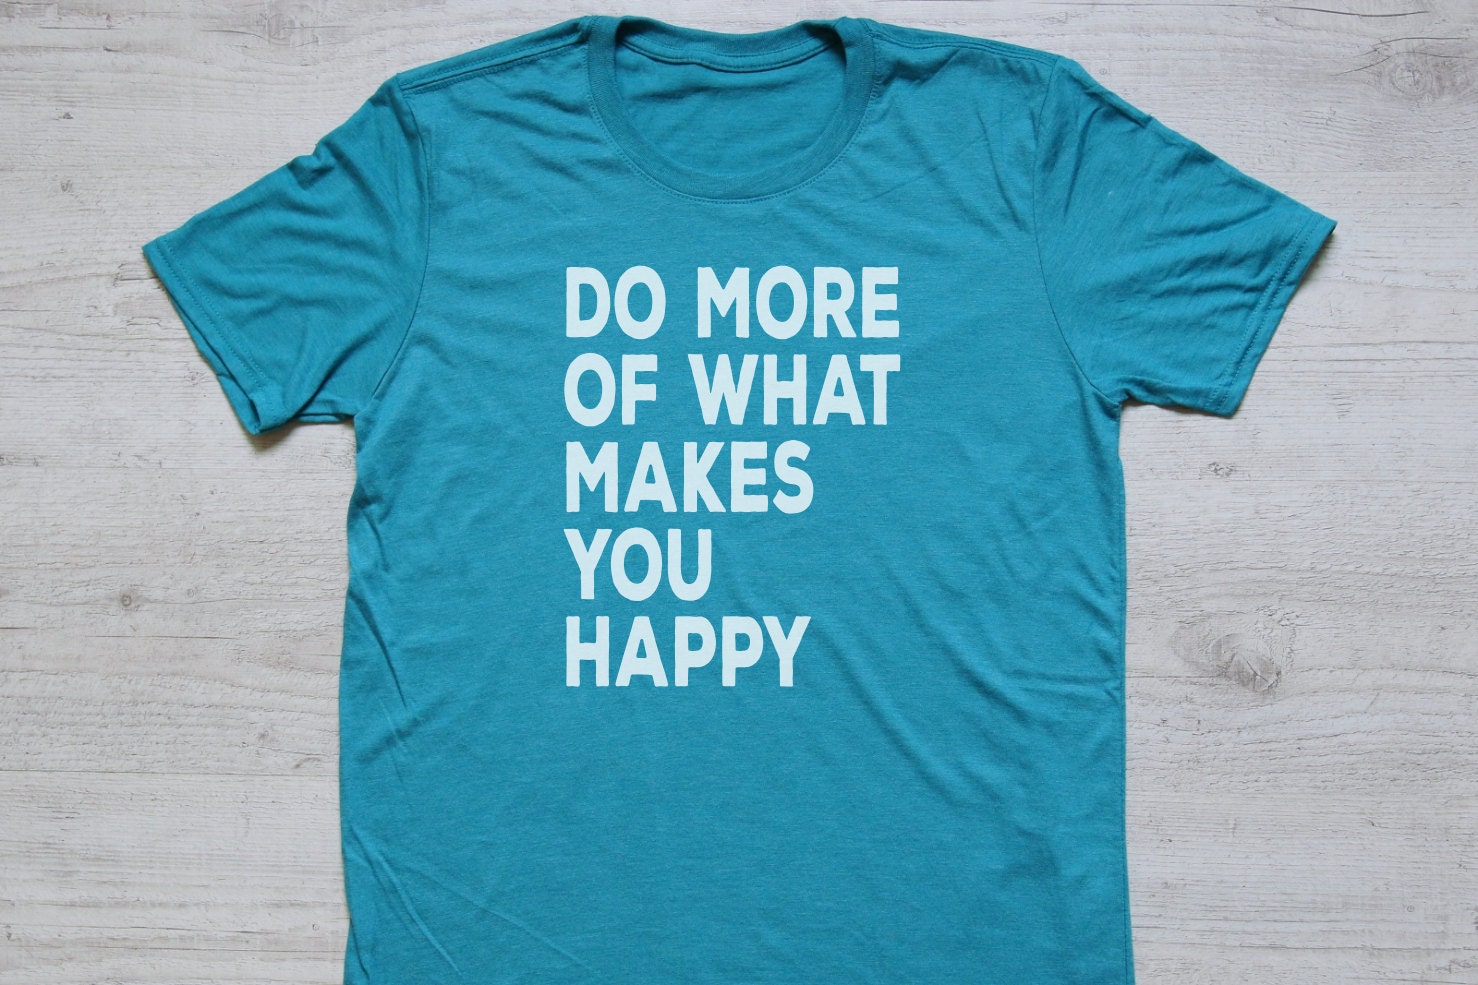 Do more of what makes you happy tee t-shirt shirt adult unisex